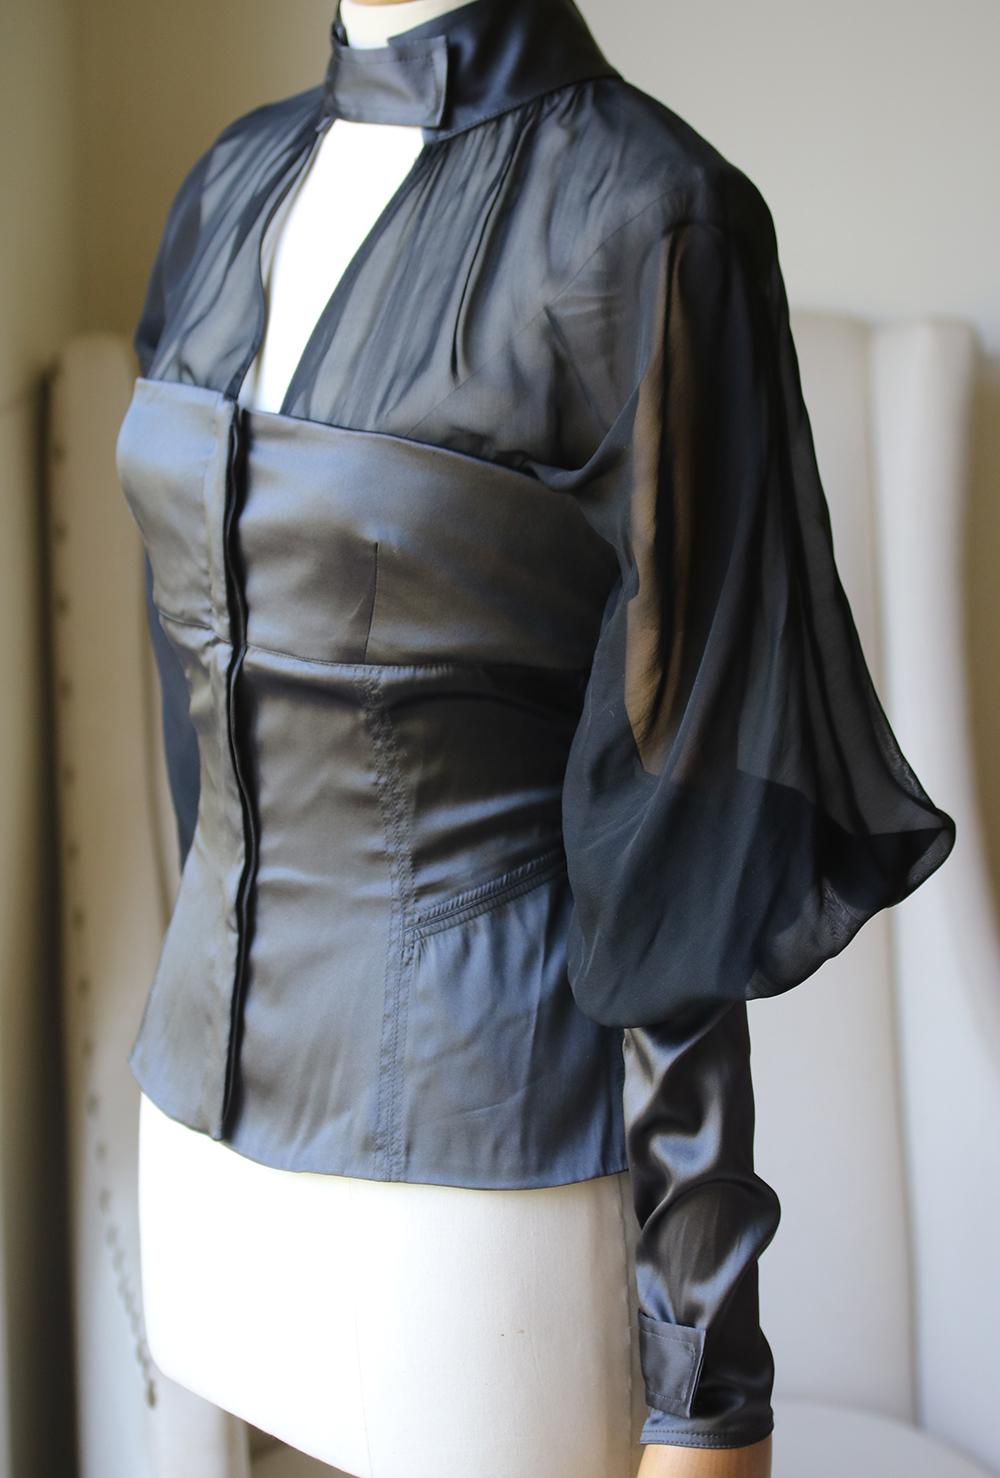 A gorgeous black and grey stretch silk top from Tom Ford for Gucci circa 2003. The bodice has a stitched strapless satin bodice with sheer chest and upper back panels with a high collar. The semi-sheer dramatic sleeves. The neckline and zippered